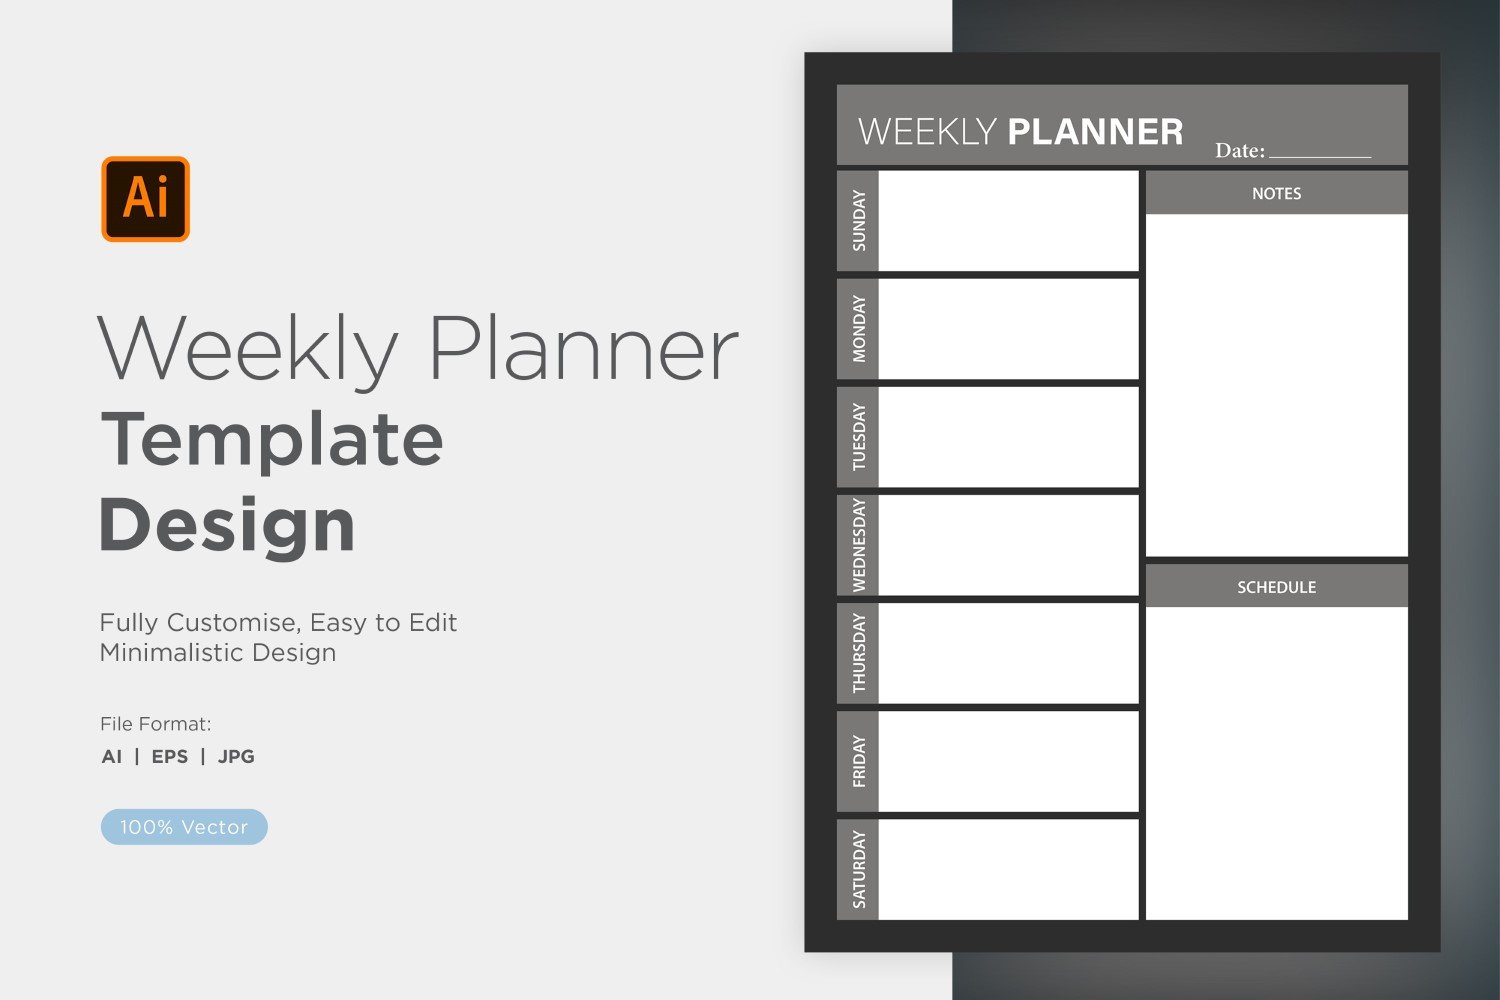 Kit Graphique #357844 Weekly Planner Divers Modles Web - Logo template Preview